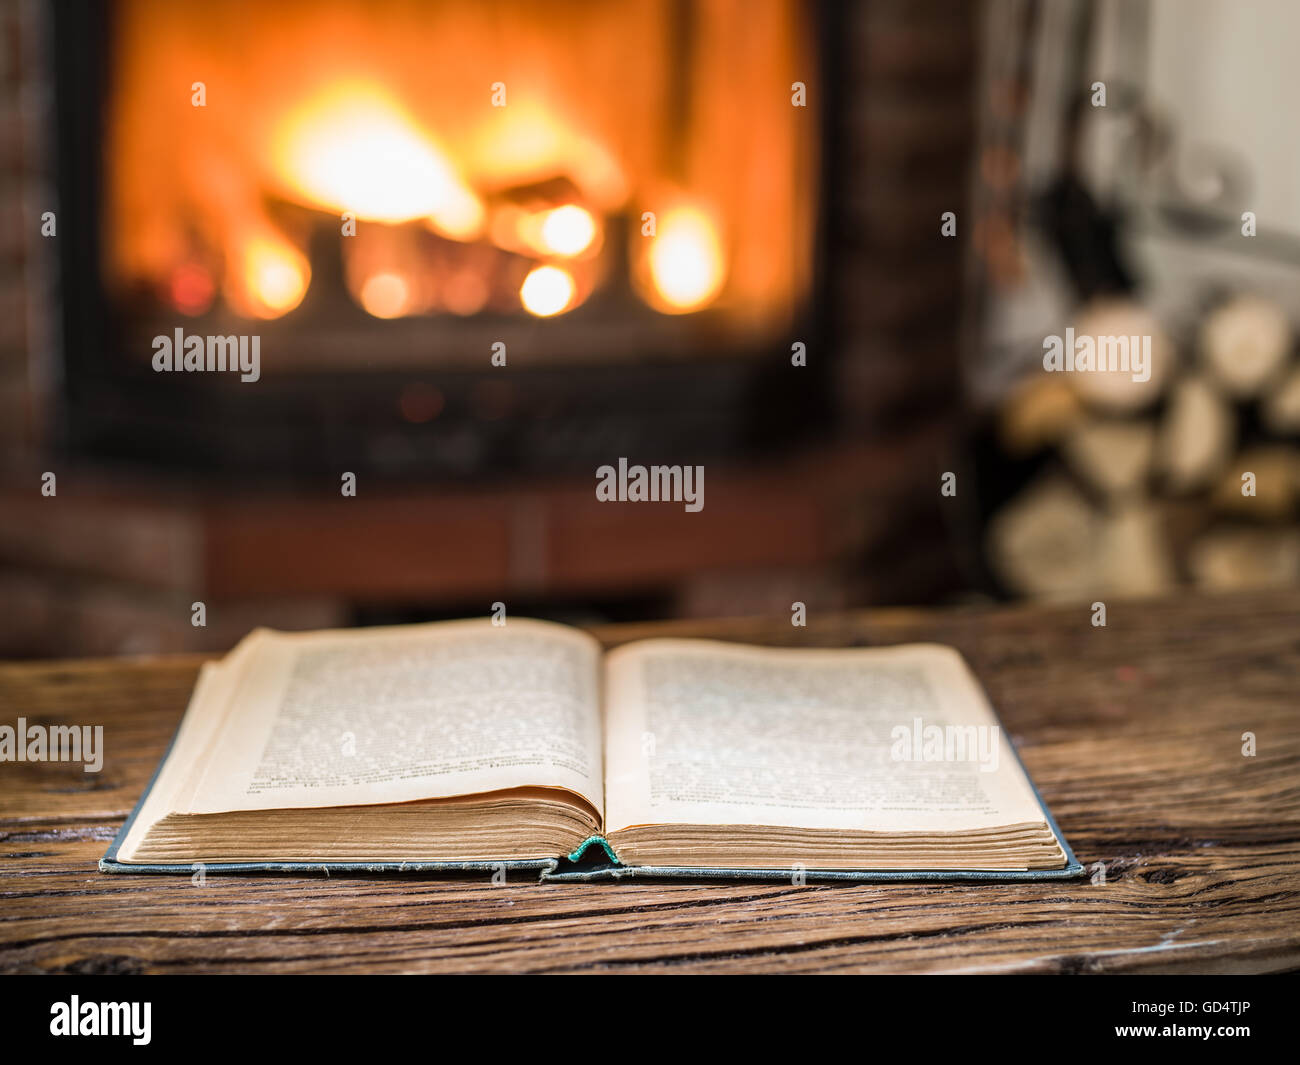 Opened book on the wooden table. Fireplace with warm fire on the background. Stock Photo